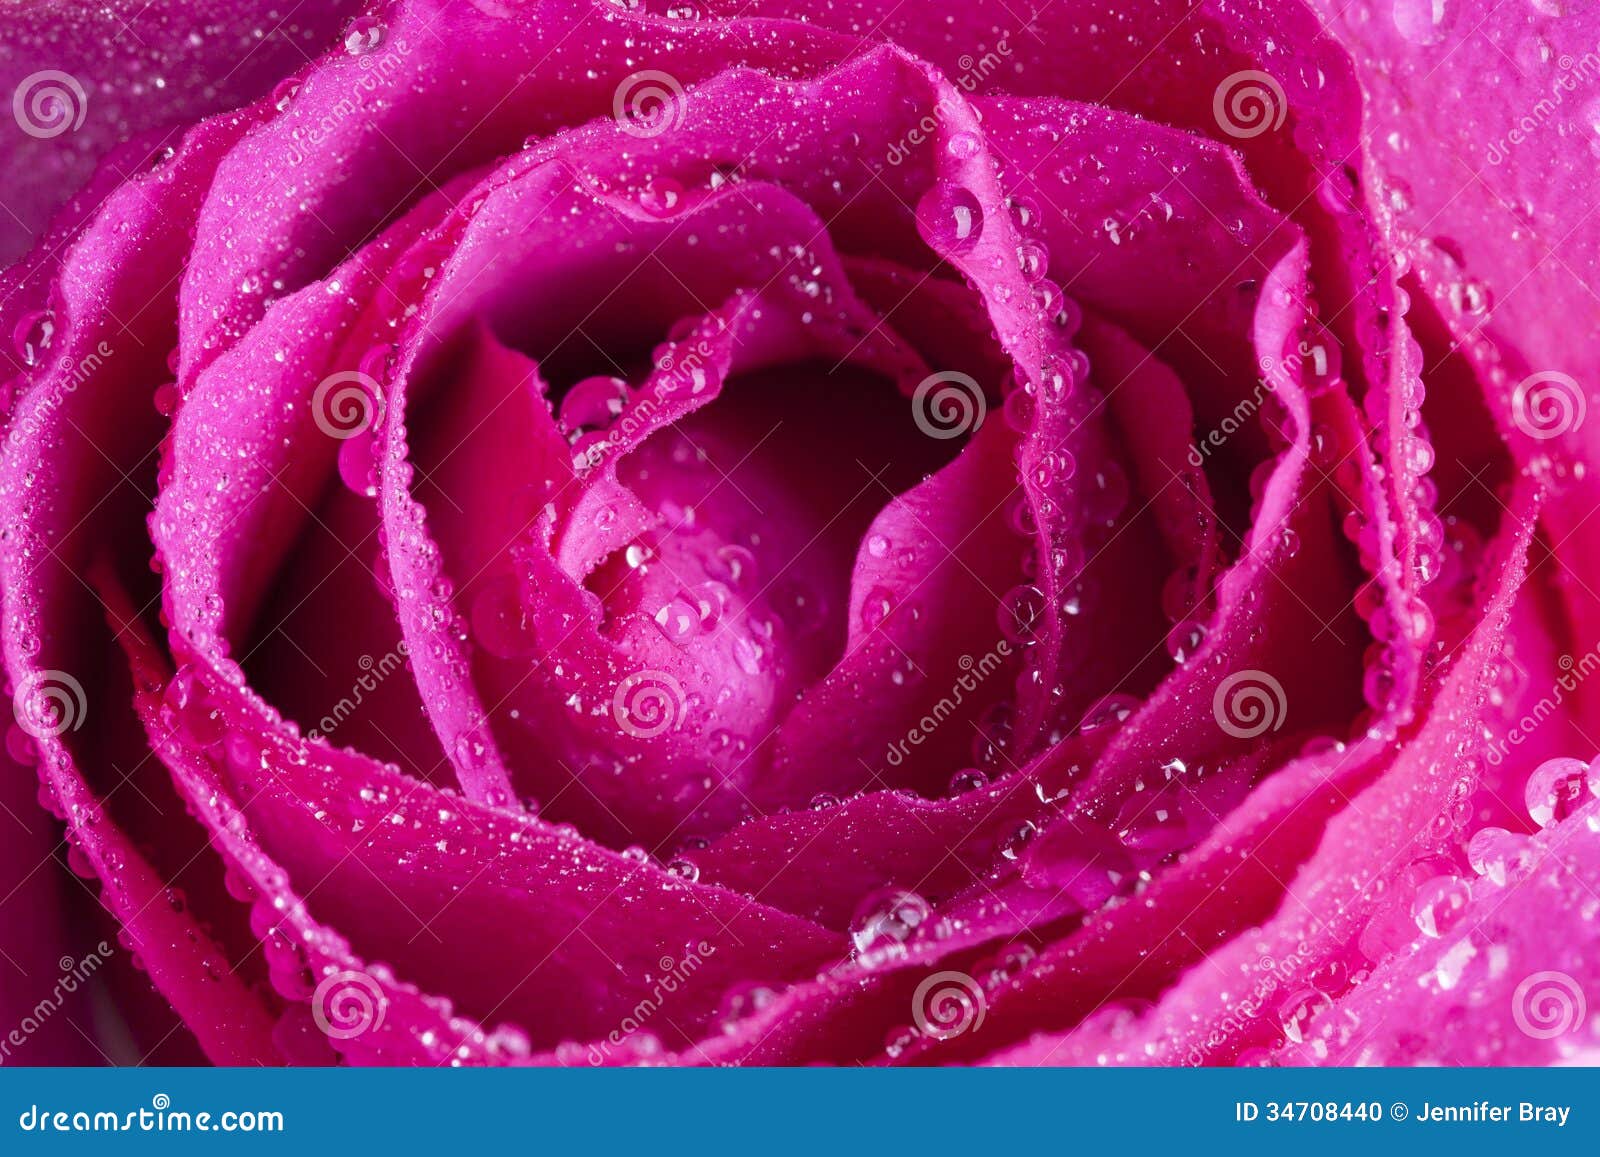 Pink Rose With Water Drops